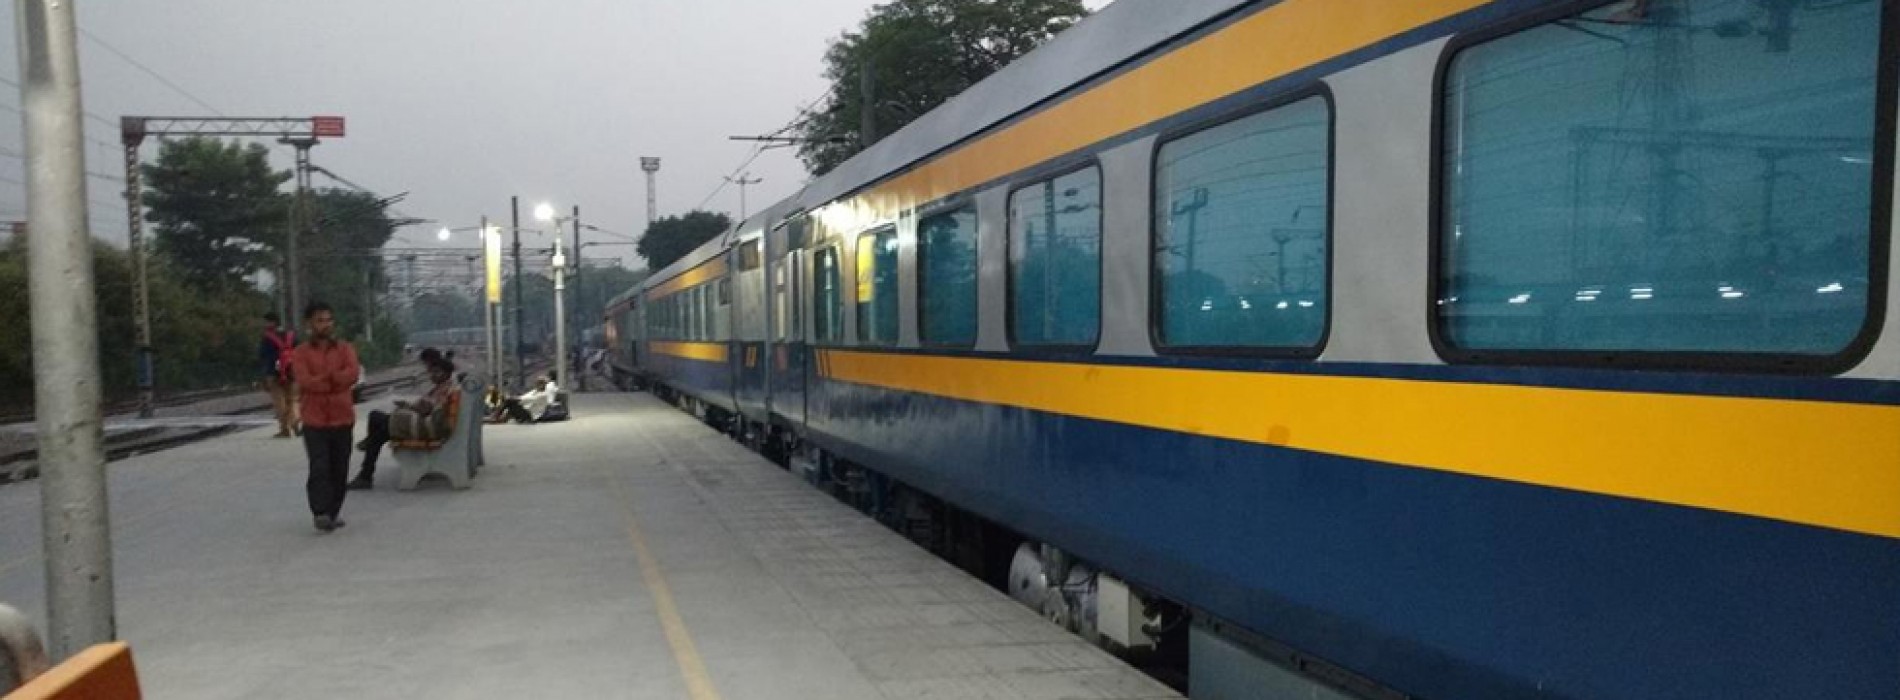 Indian Railways launches new train services from Bhubaneswar and Bhopal